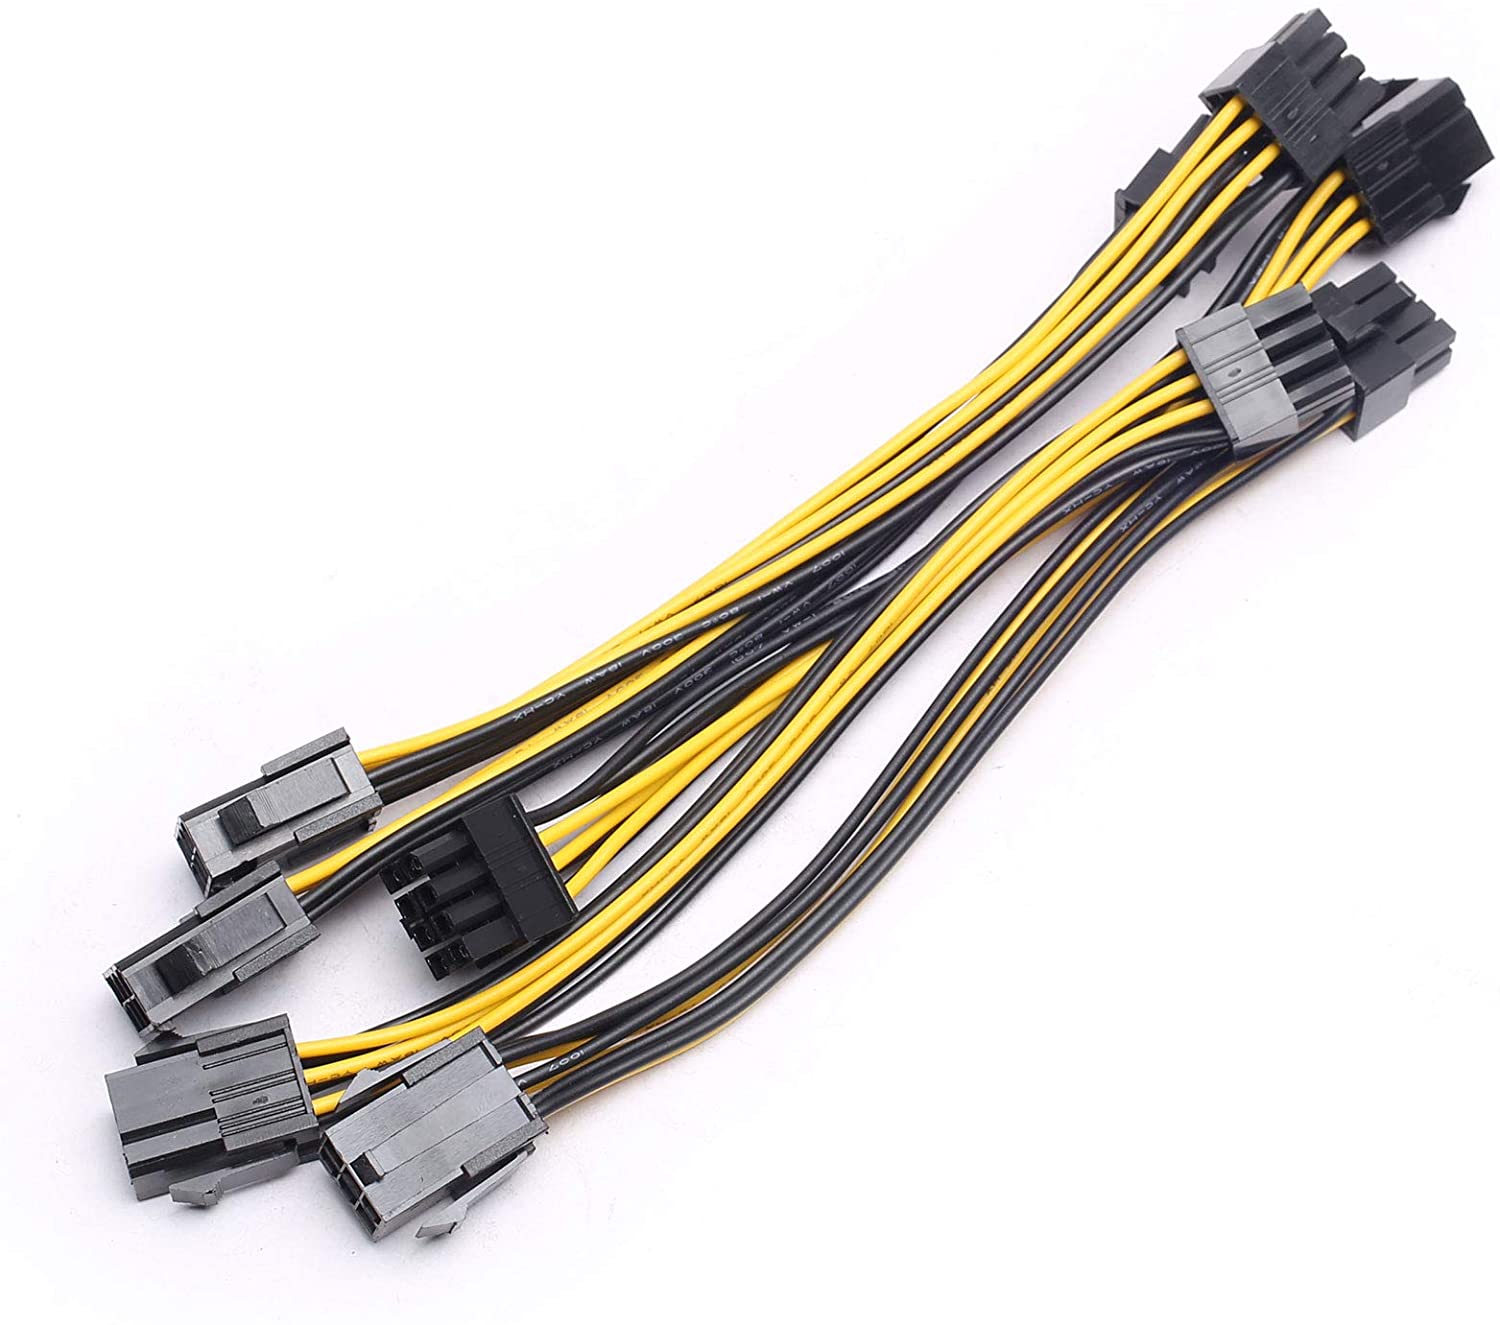 43201553 6pin to 8-pin PCI Express Power Converter Cable for Video Card PCIE, 1 Piece 50104657